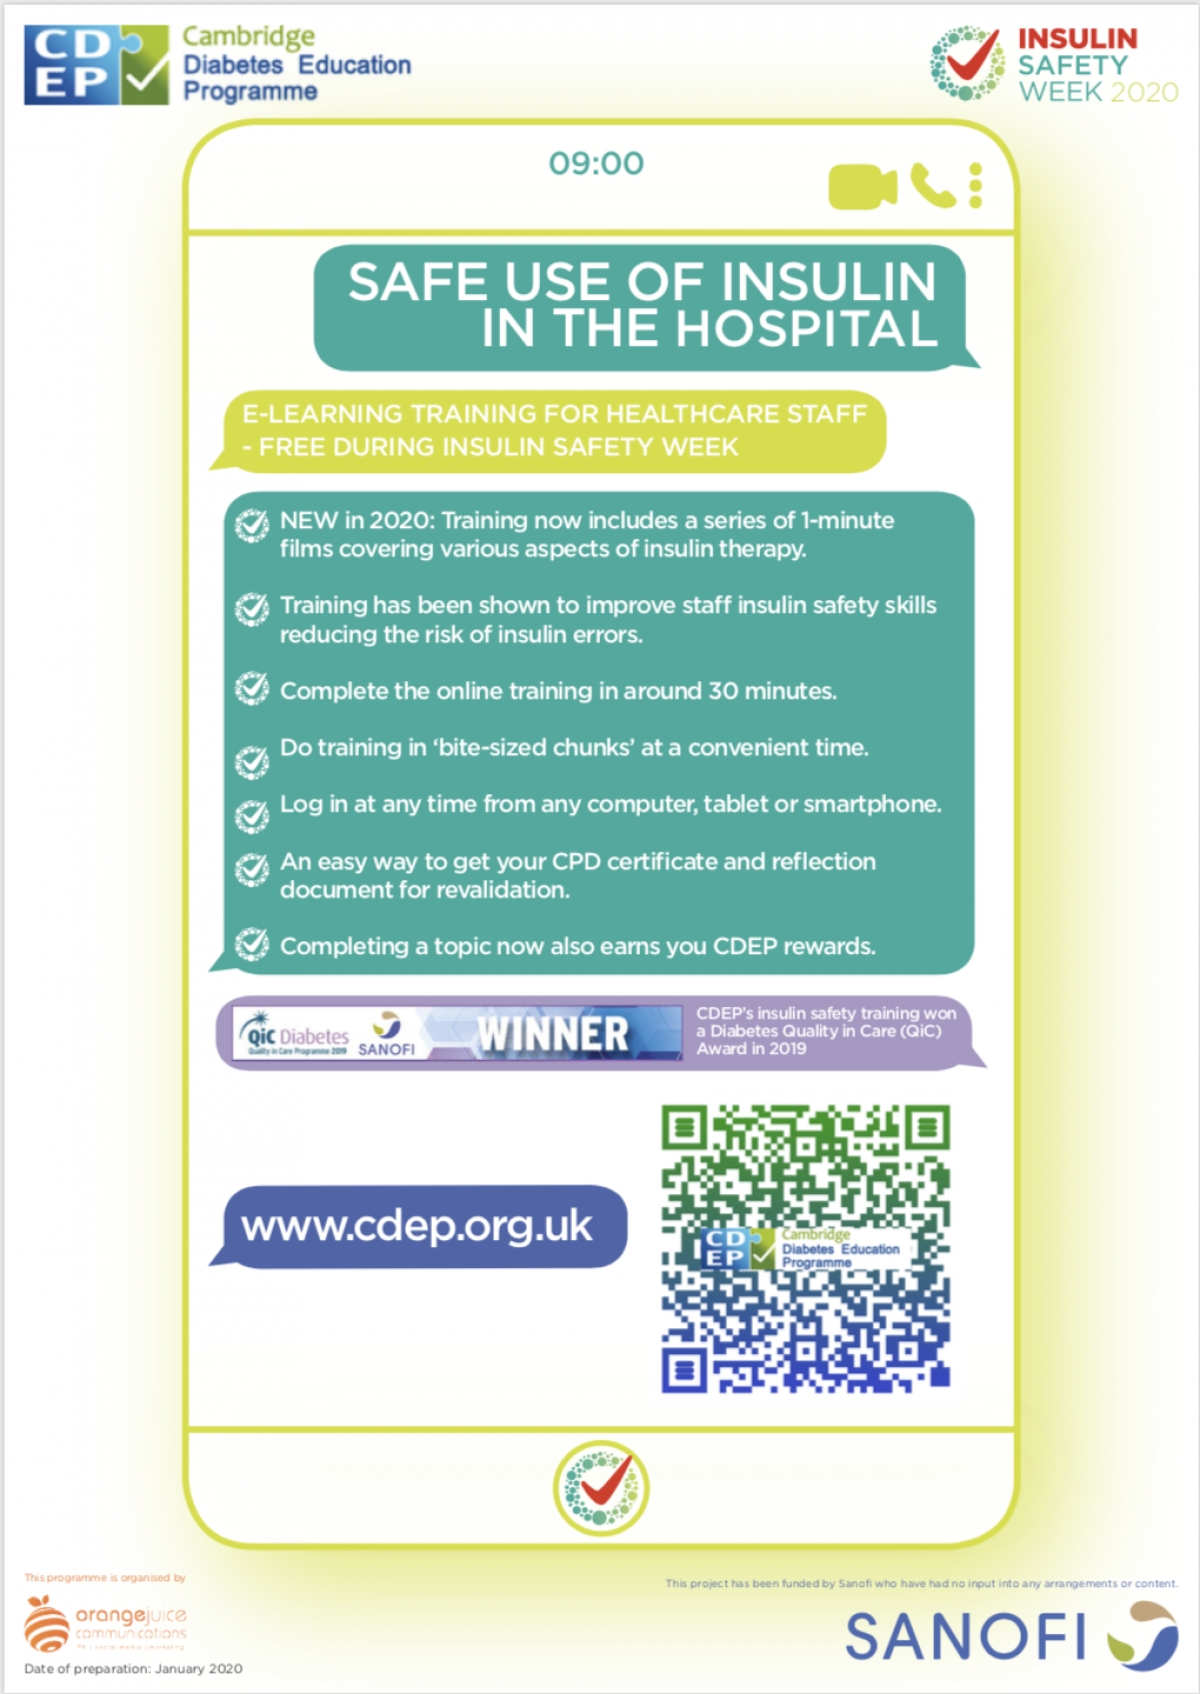 CDEPs Insulin Safety Training Shortlisted For Prestigous HSJ Patient Safety Awards